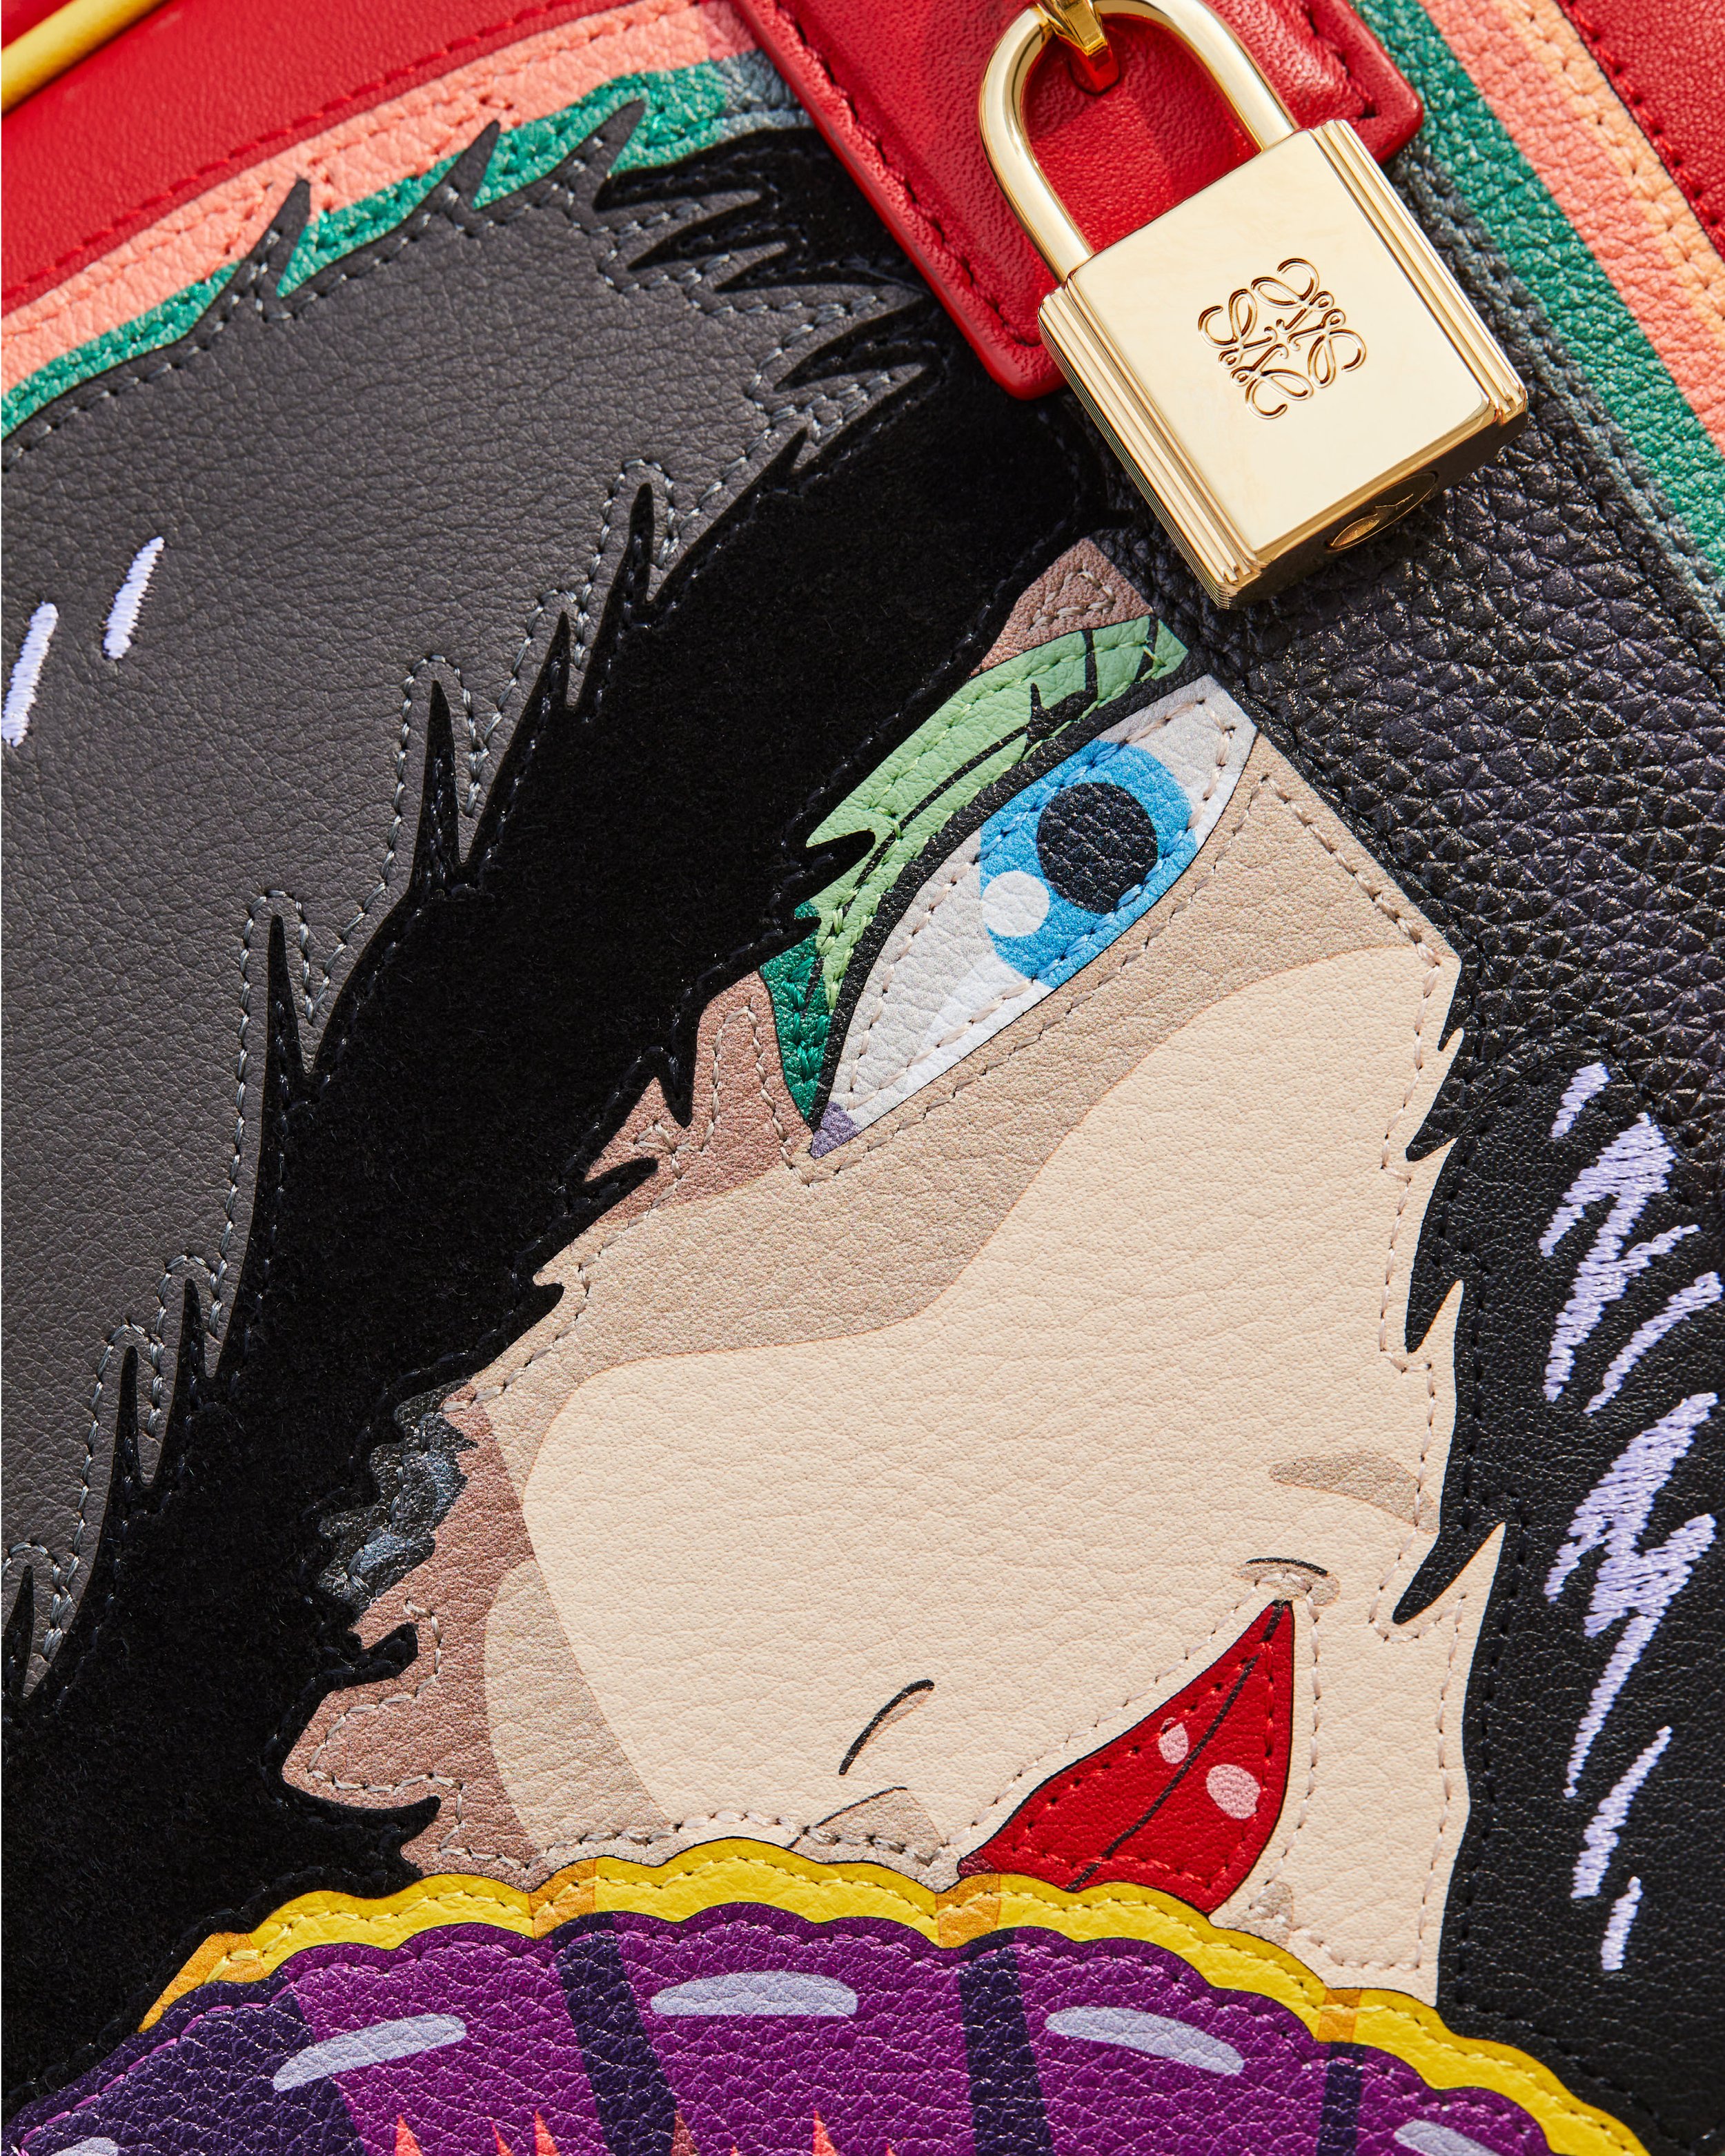 LOEWE x Howl_s Moving Castle Capsule Collection - Product Close-up (7).jpg